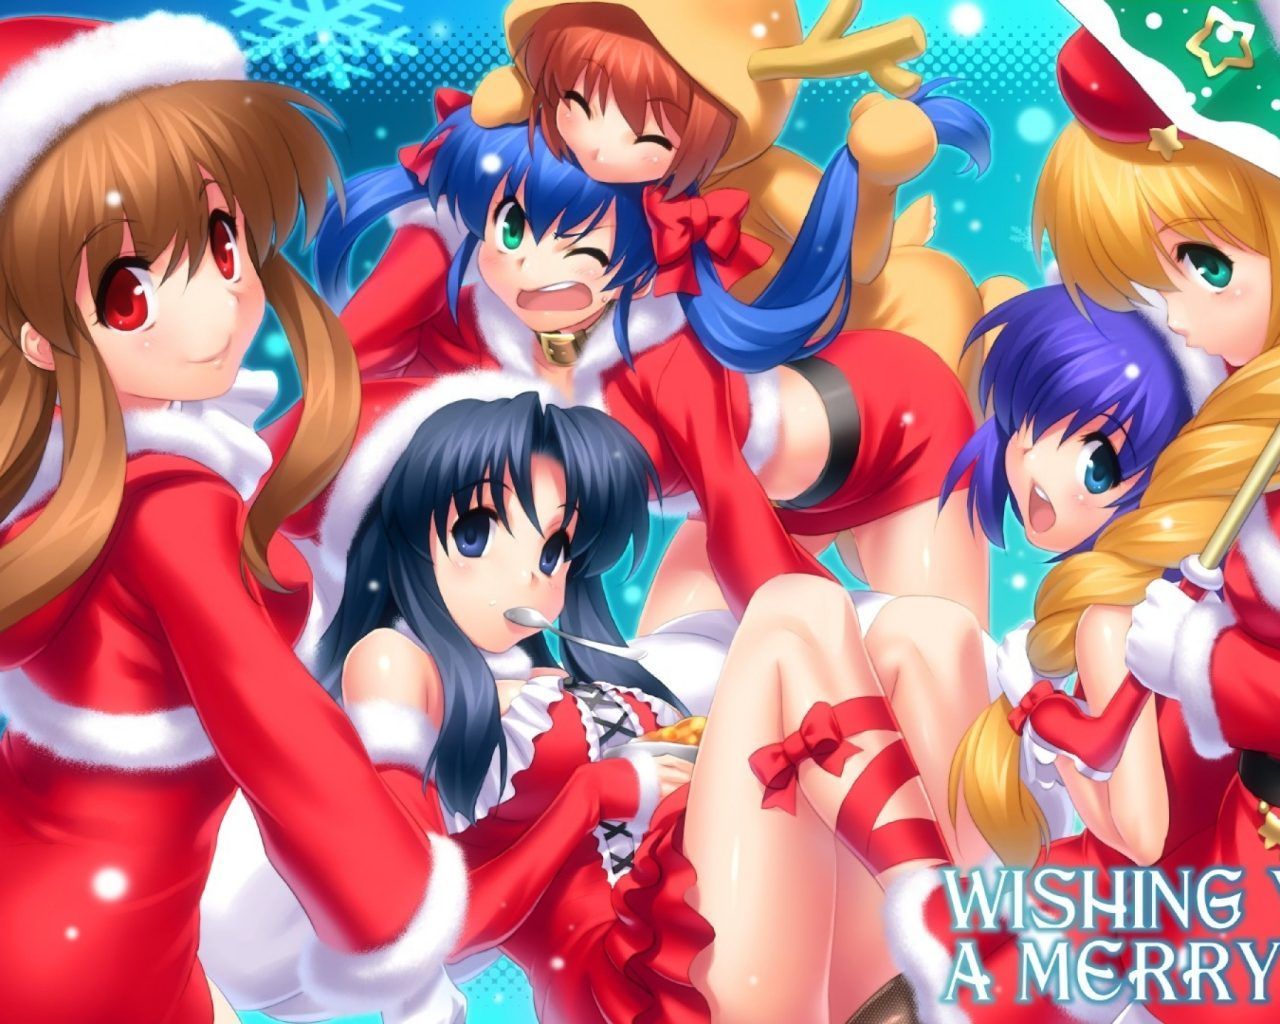 Christmas Girls With Blond Brown Hair Celebration Of Christmas And New Year Anime Christmas Picture Desktop HD Wallpaper 2560x1440, Wallpaper13.com